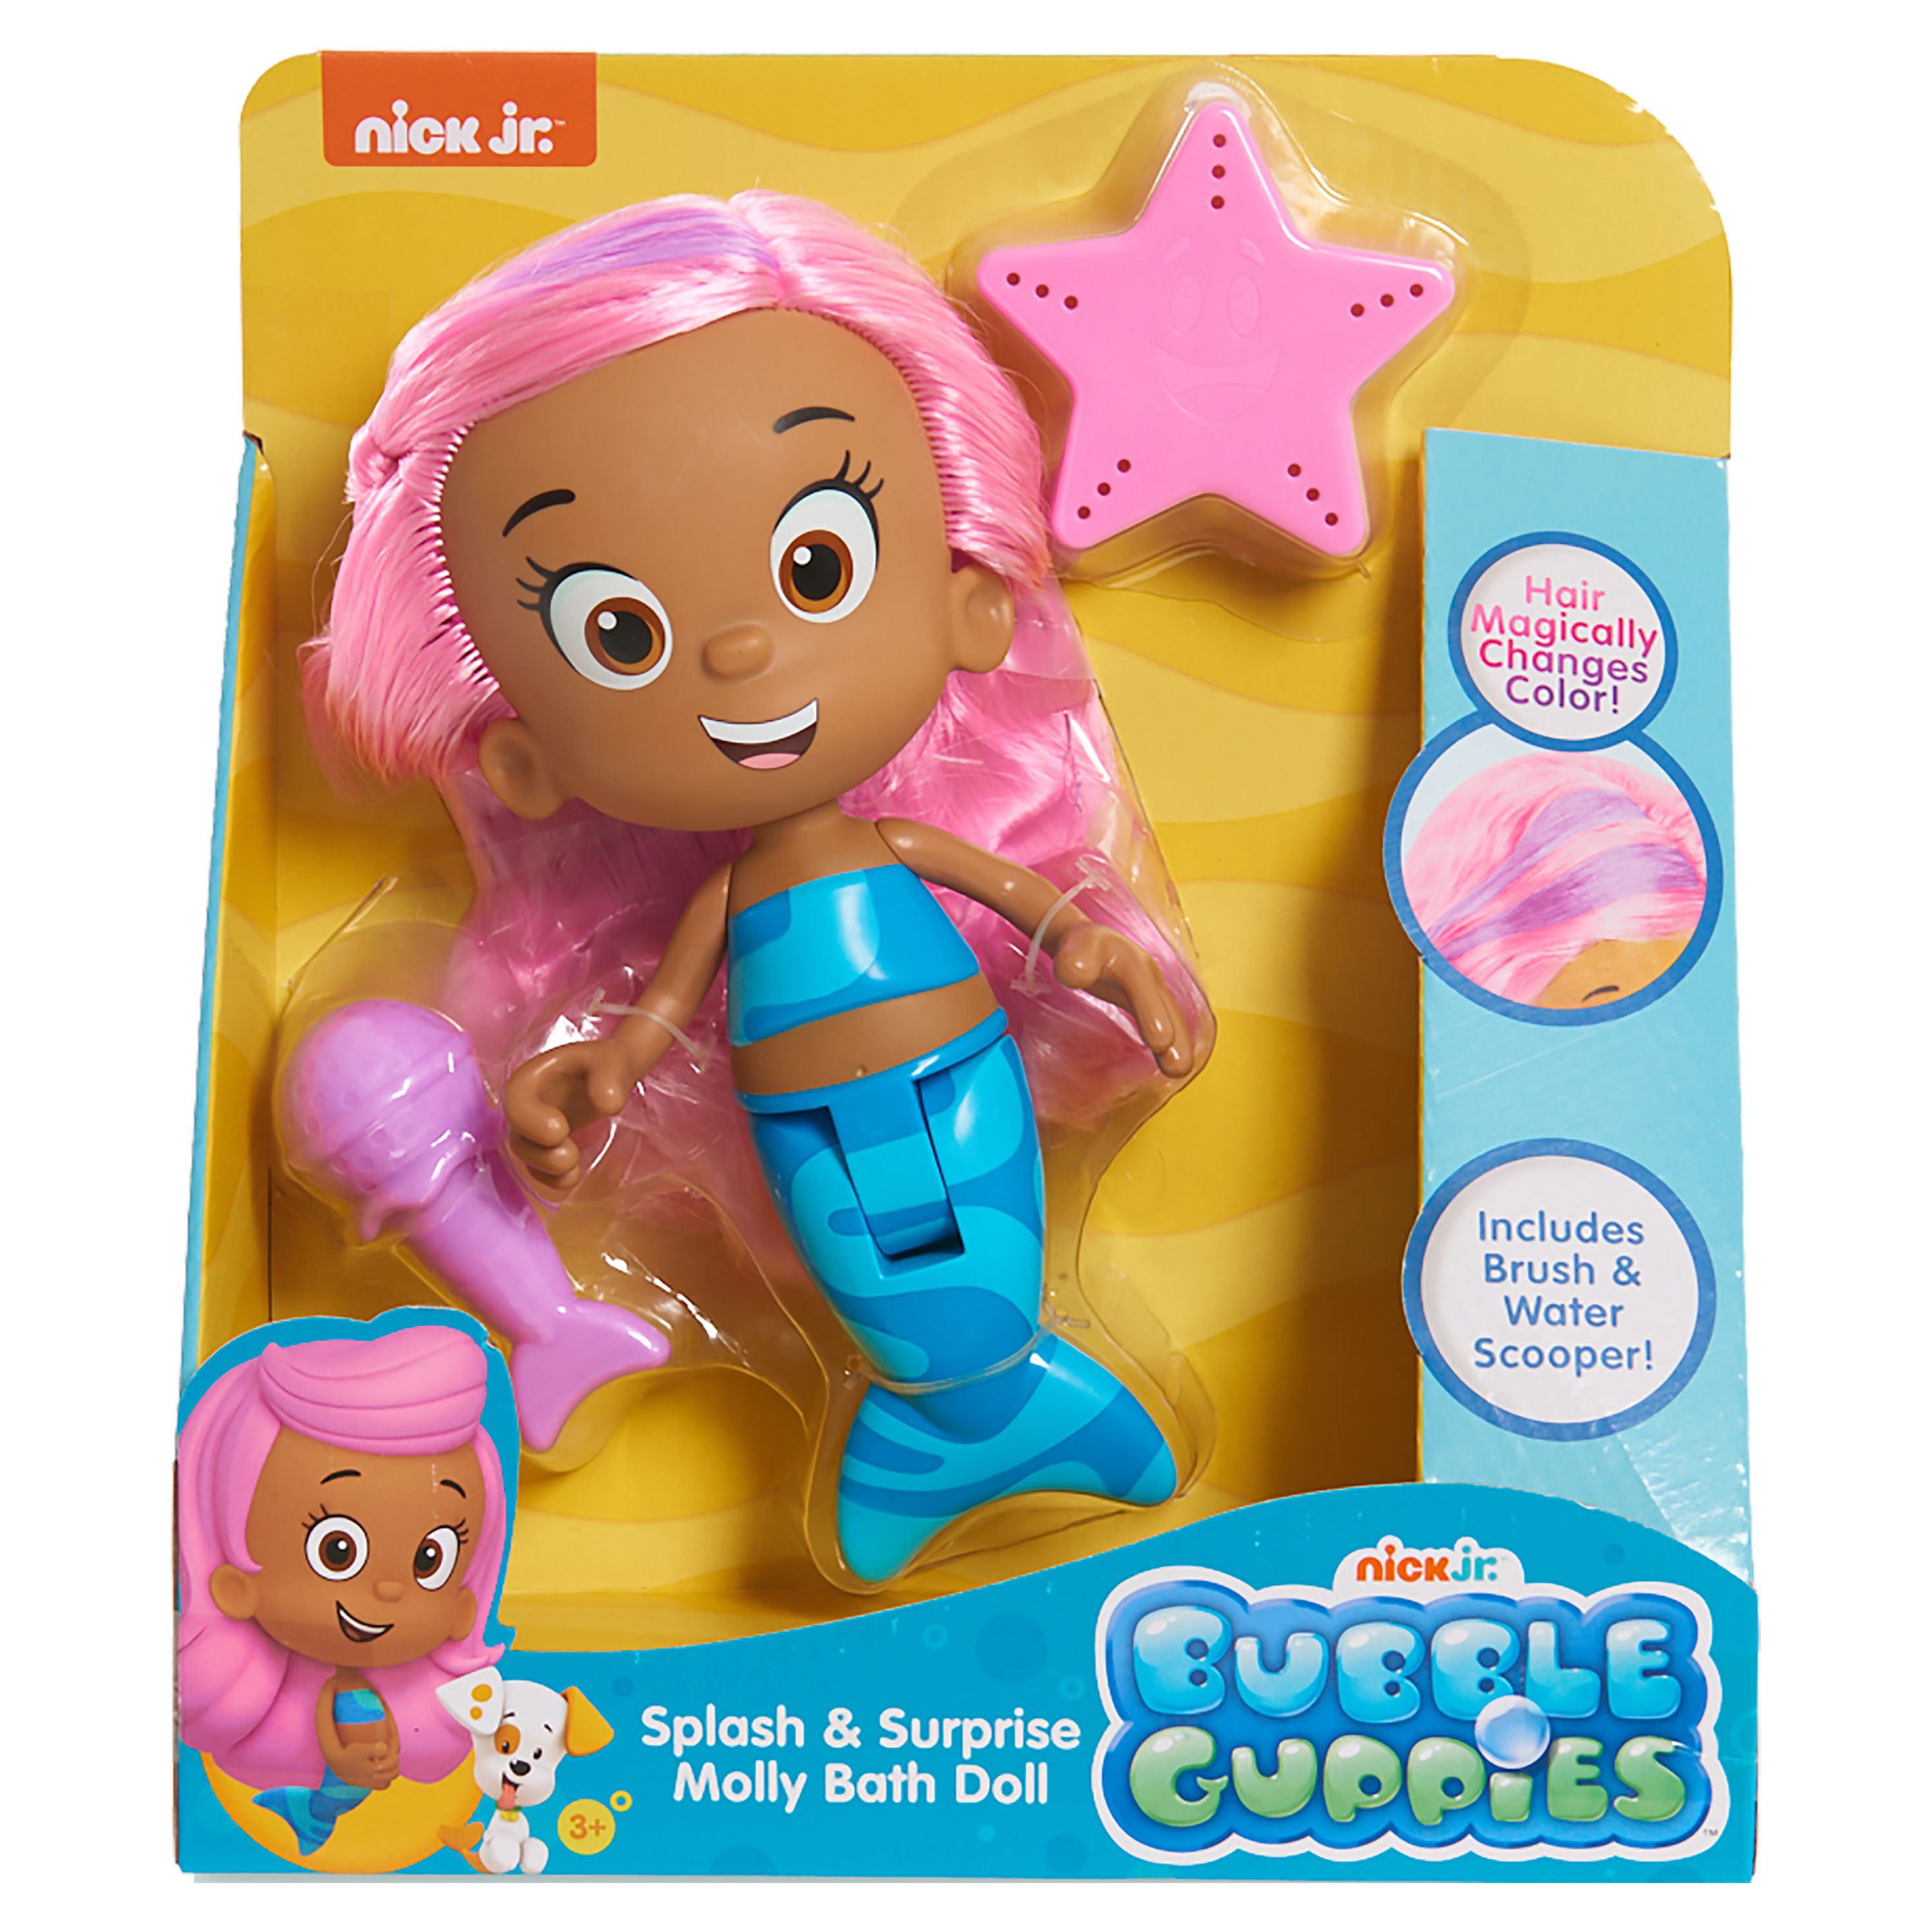 Bubble Guppies Splash and Surprise Molly Bath Doll,  Kids Toys for Ages 3 Up, Gifts and Presents - image 5 of 5